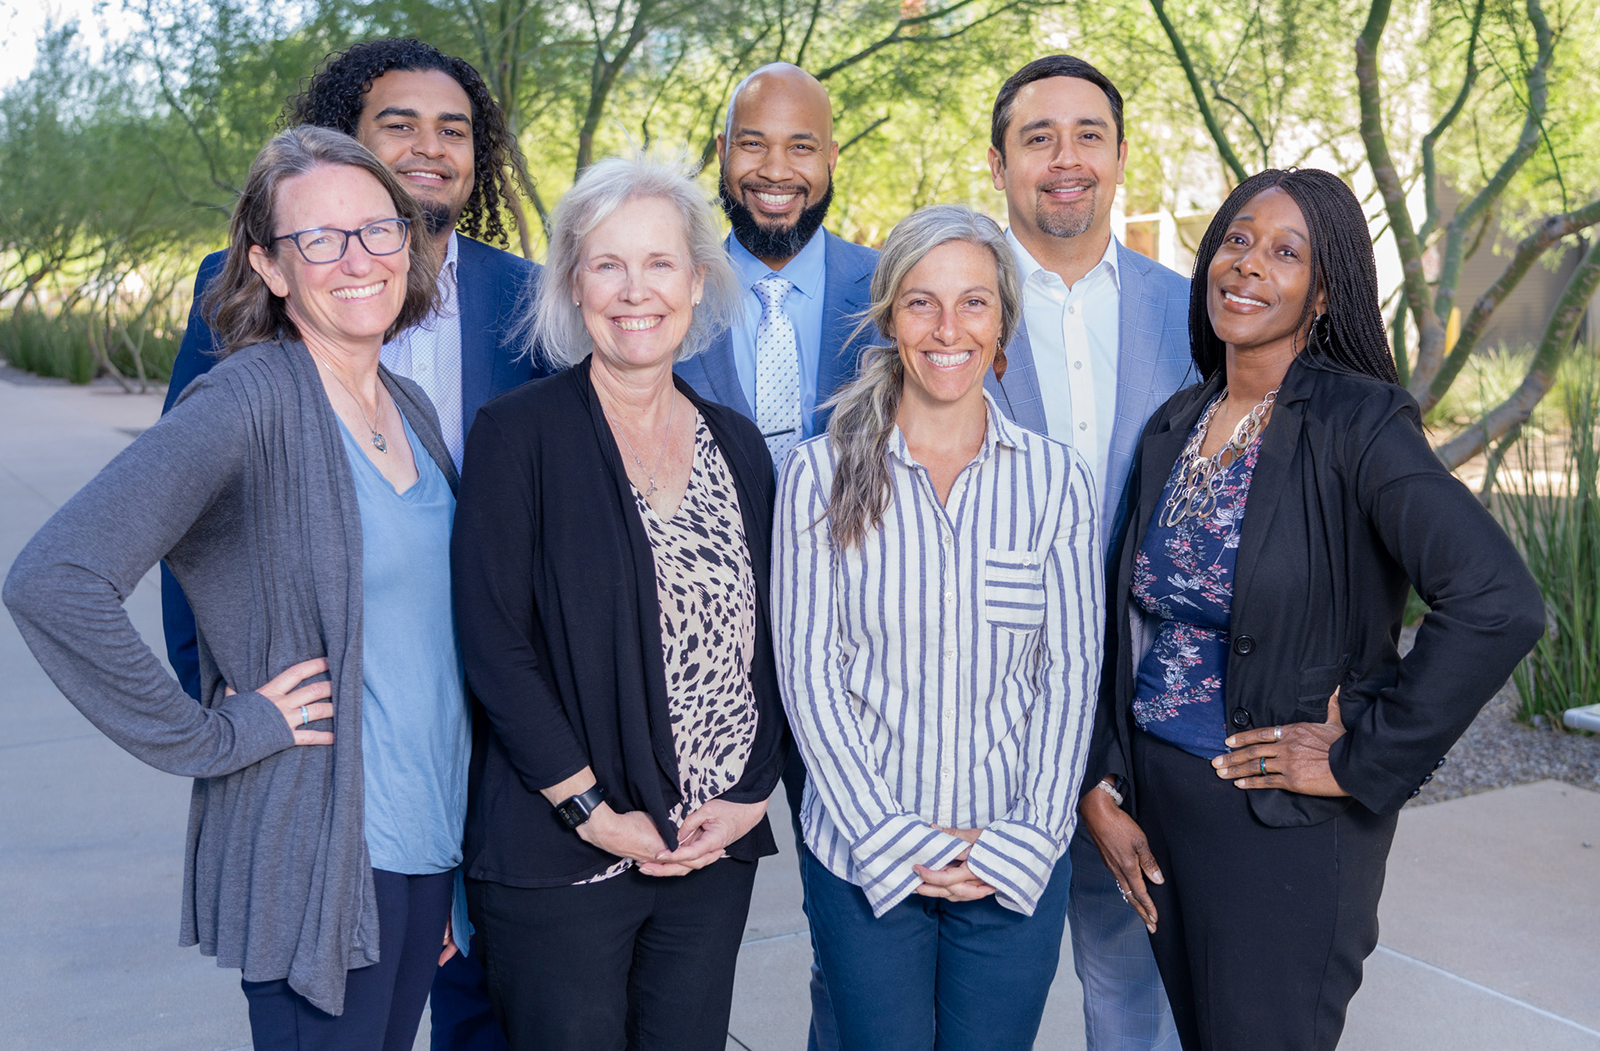 Members of the college's Office of Equity, Diversity and Inclusion team (from left to right): Taben Hale, PhD, Harrison Williams, Julie Parrish, Nafis Shamsid-Deen, MD, Camellia Bellis, Francisco Lucio, JD, and  Sonji Muhammad Perry